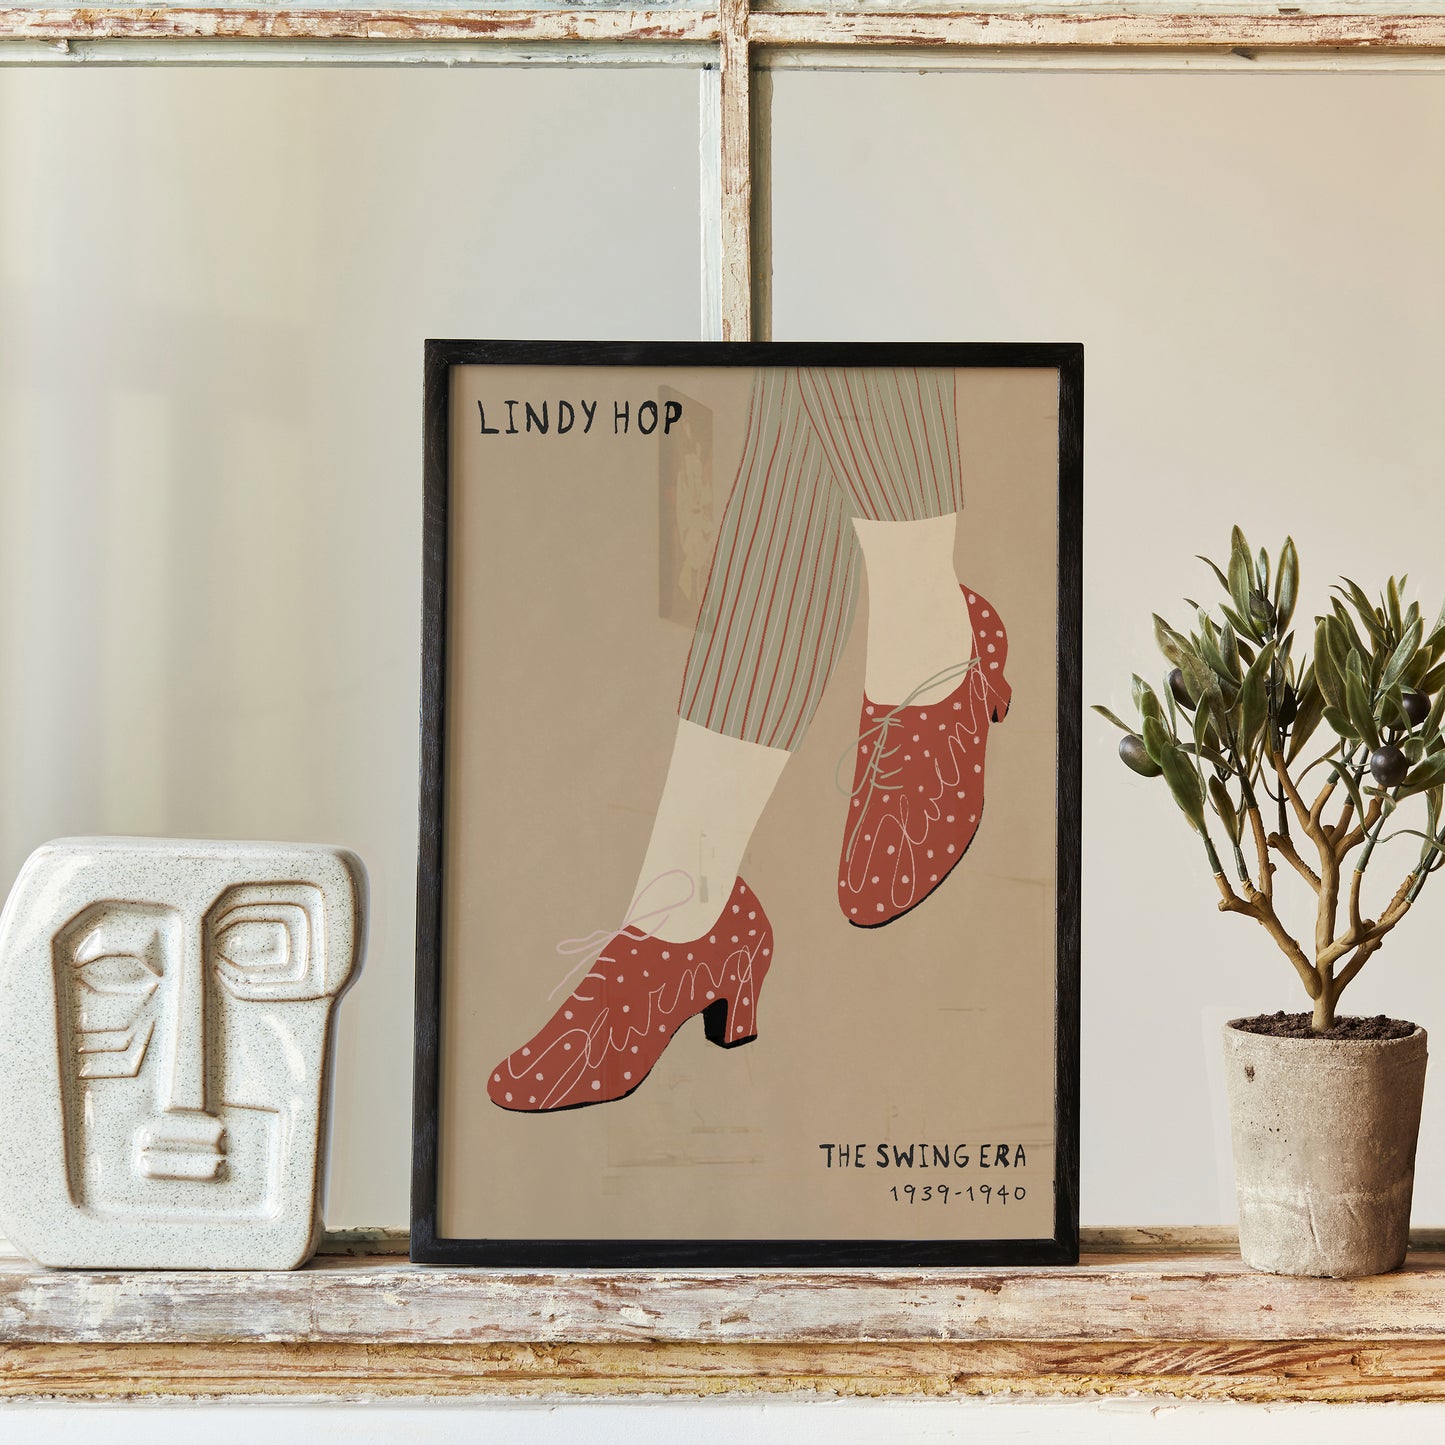 Lindy Hop, The Swing Era Poster